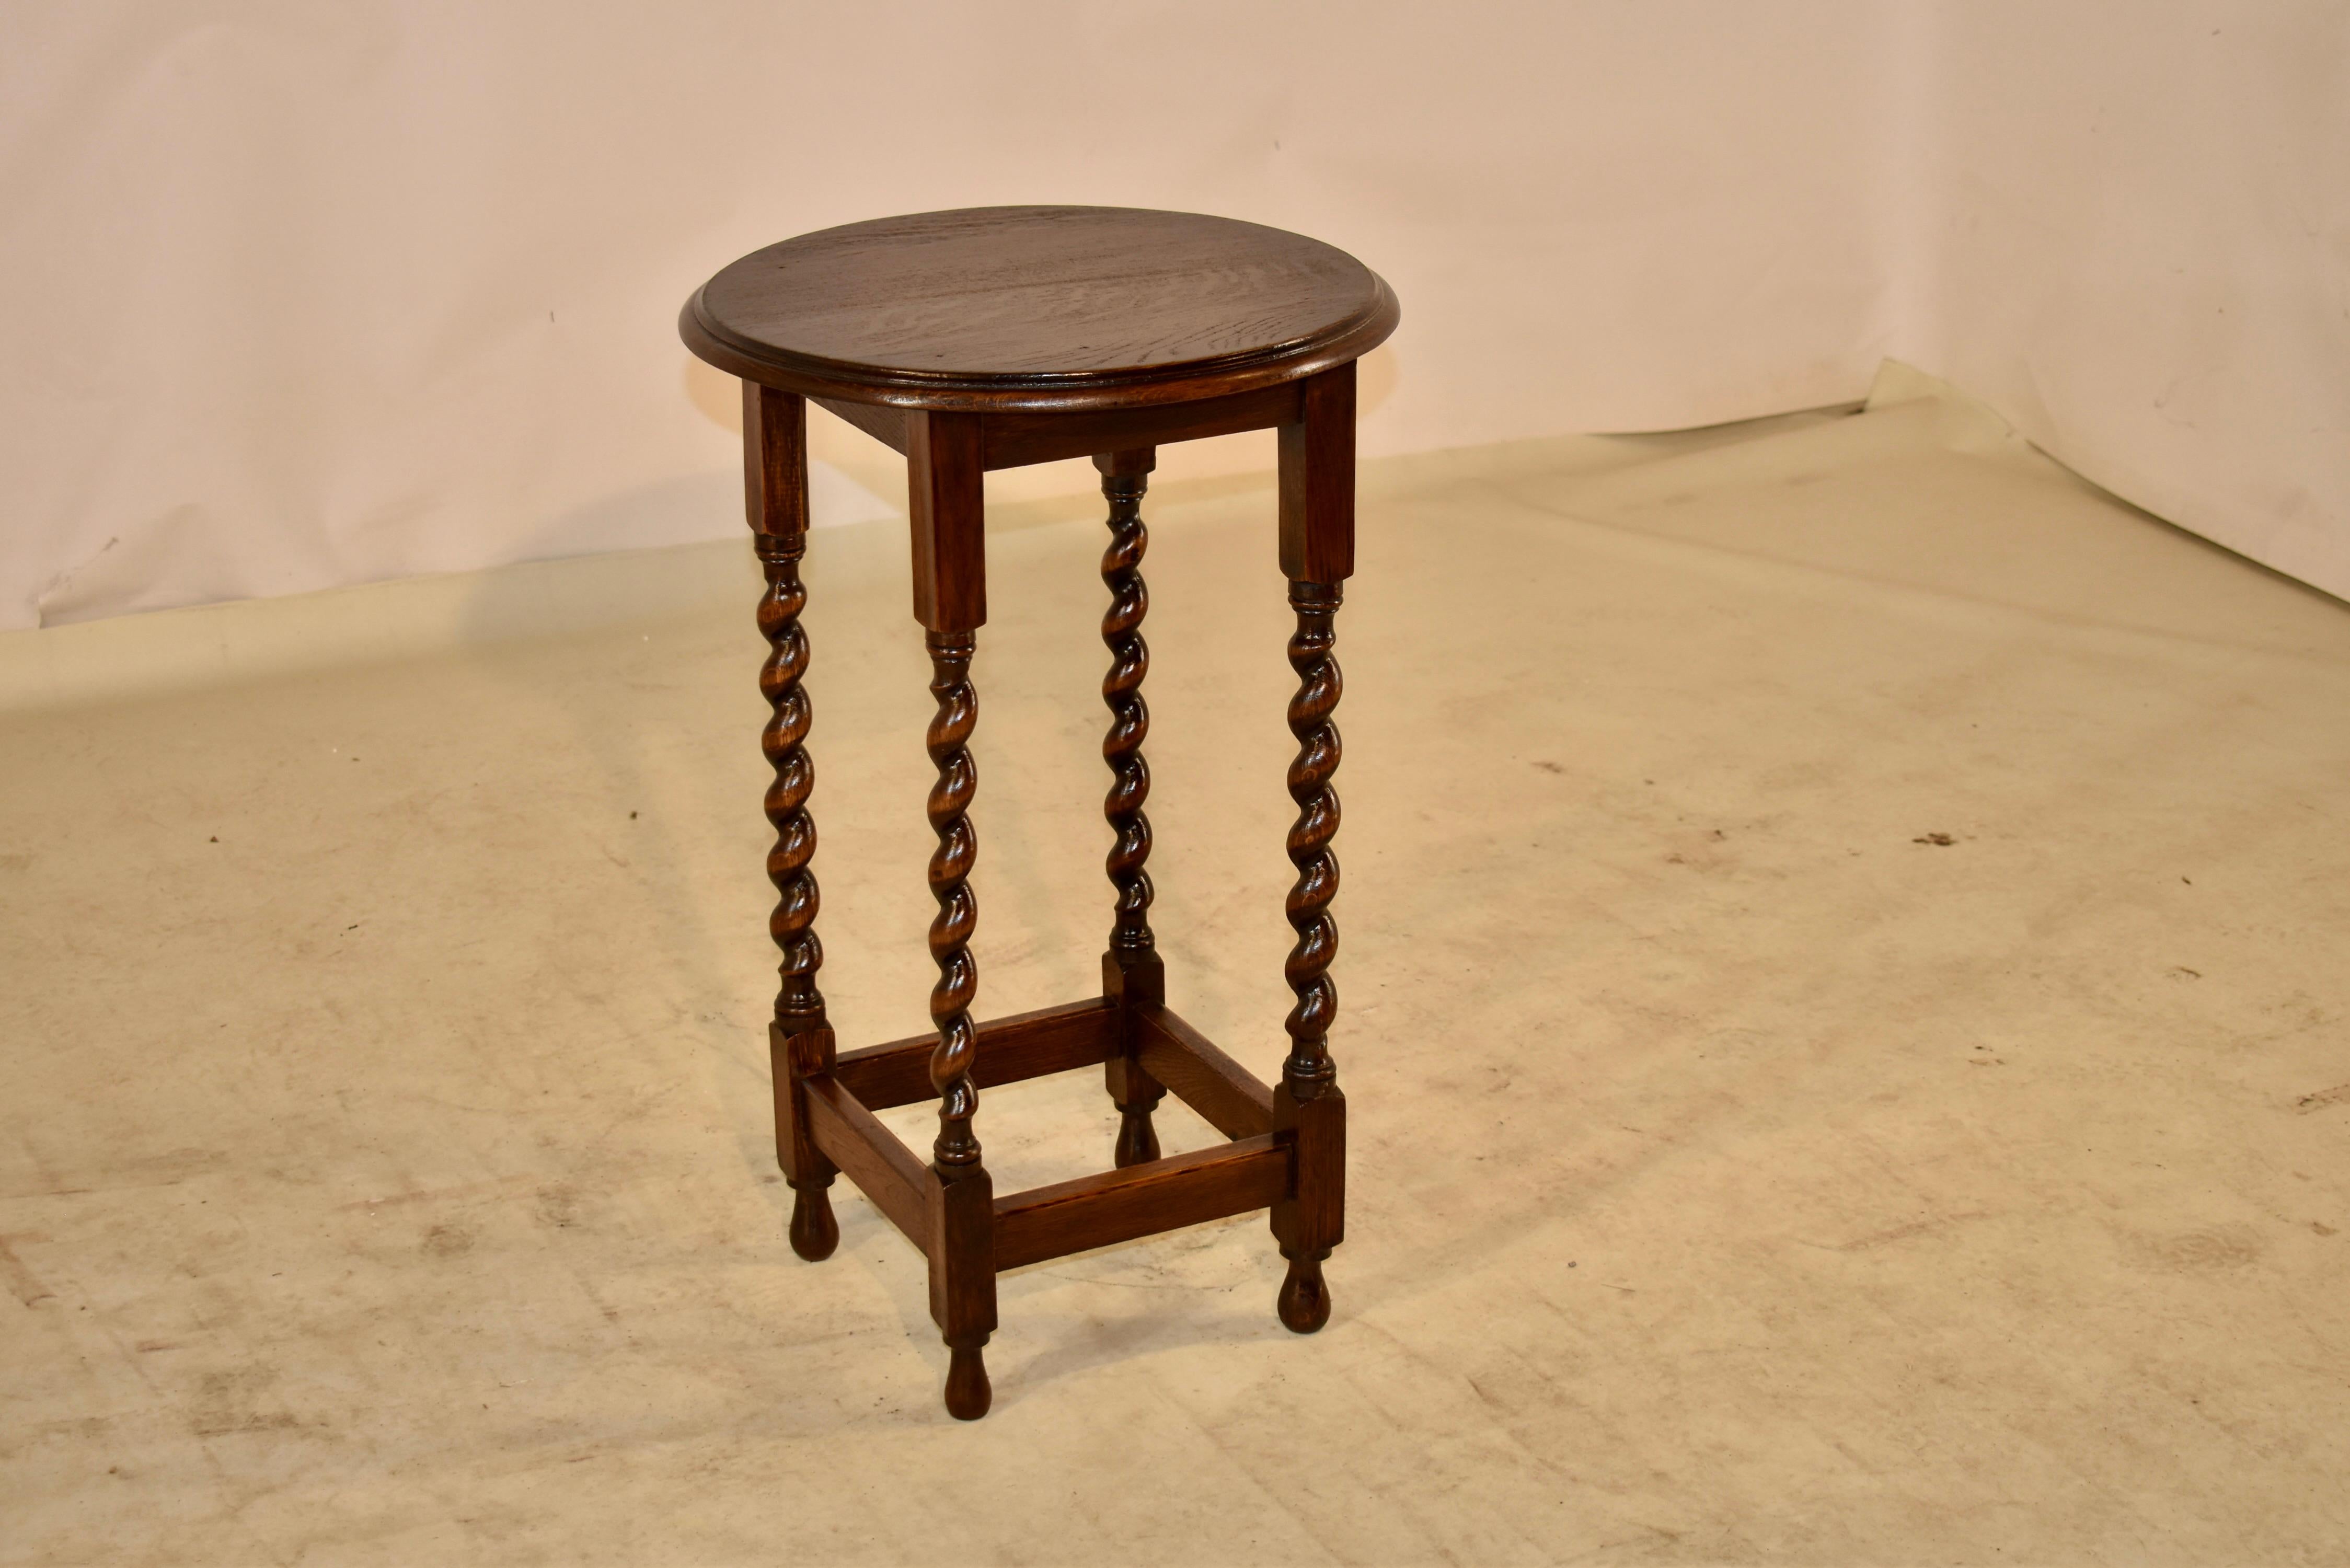 Edwardian oak side table, circa 1900. The top is round and has a beveled edge, following down to a simple apron and is supported on hand turned barley twist legs, joined at the bottom by simple stretchers. The table is raised on hand turned feet.